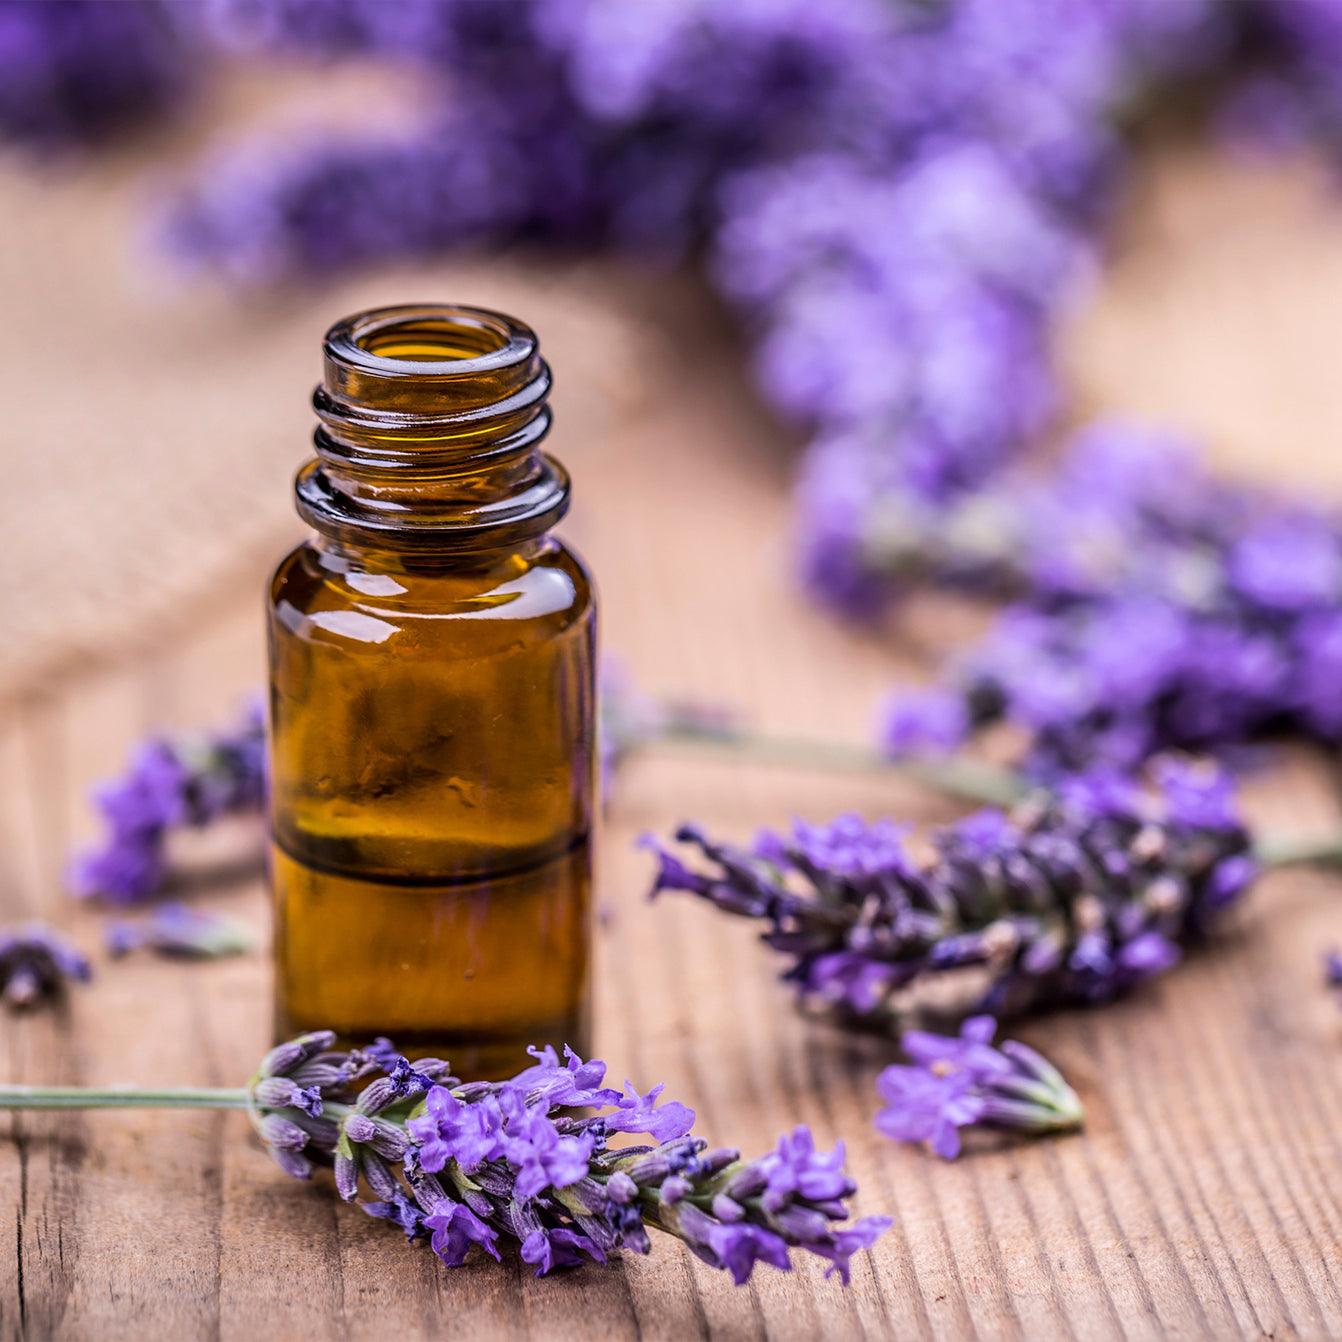 How to Determine the Quality of Essential Oils